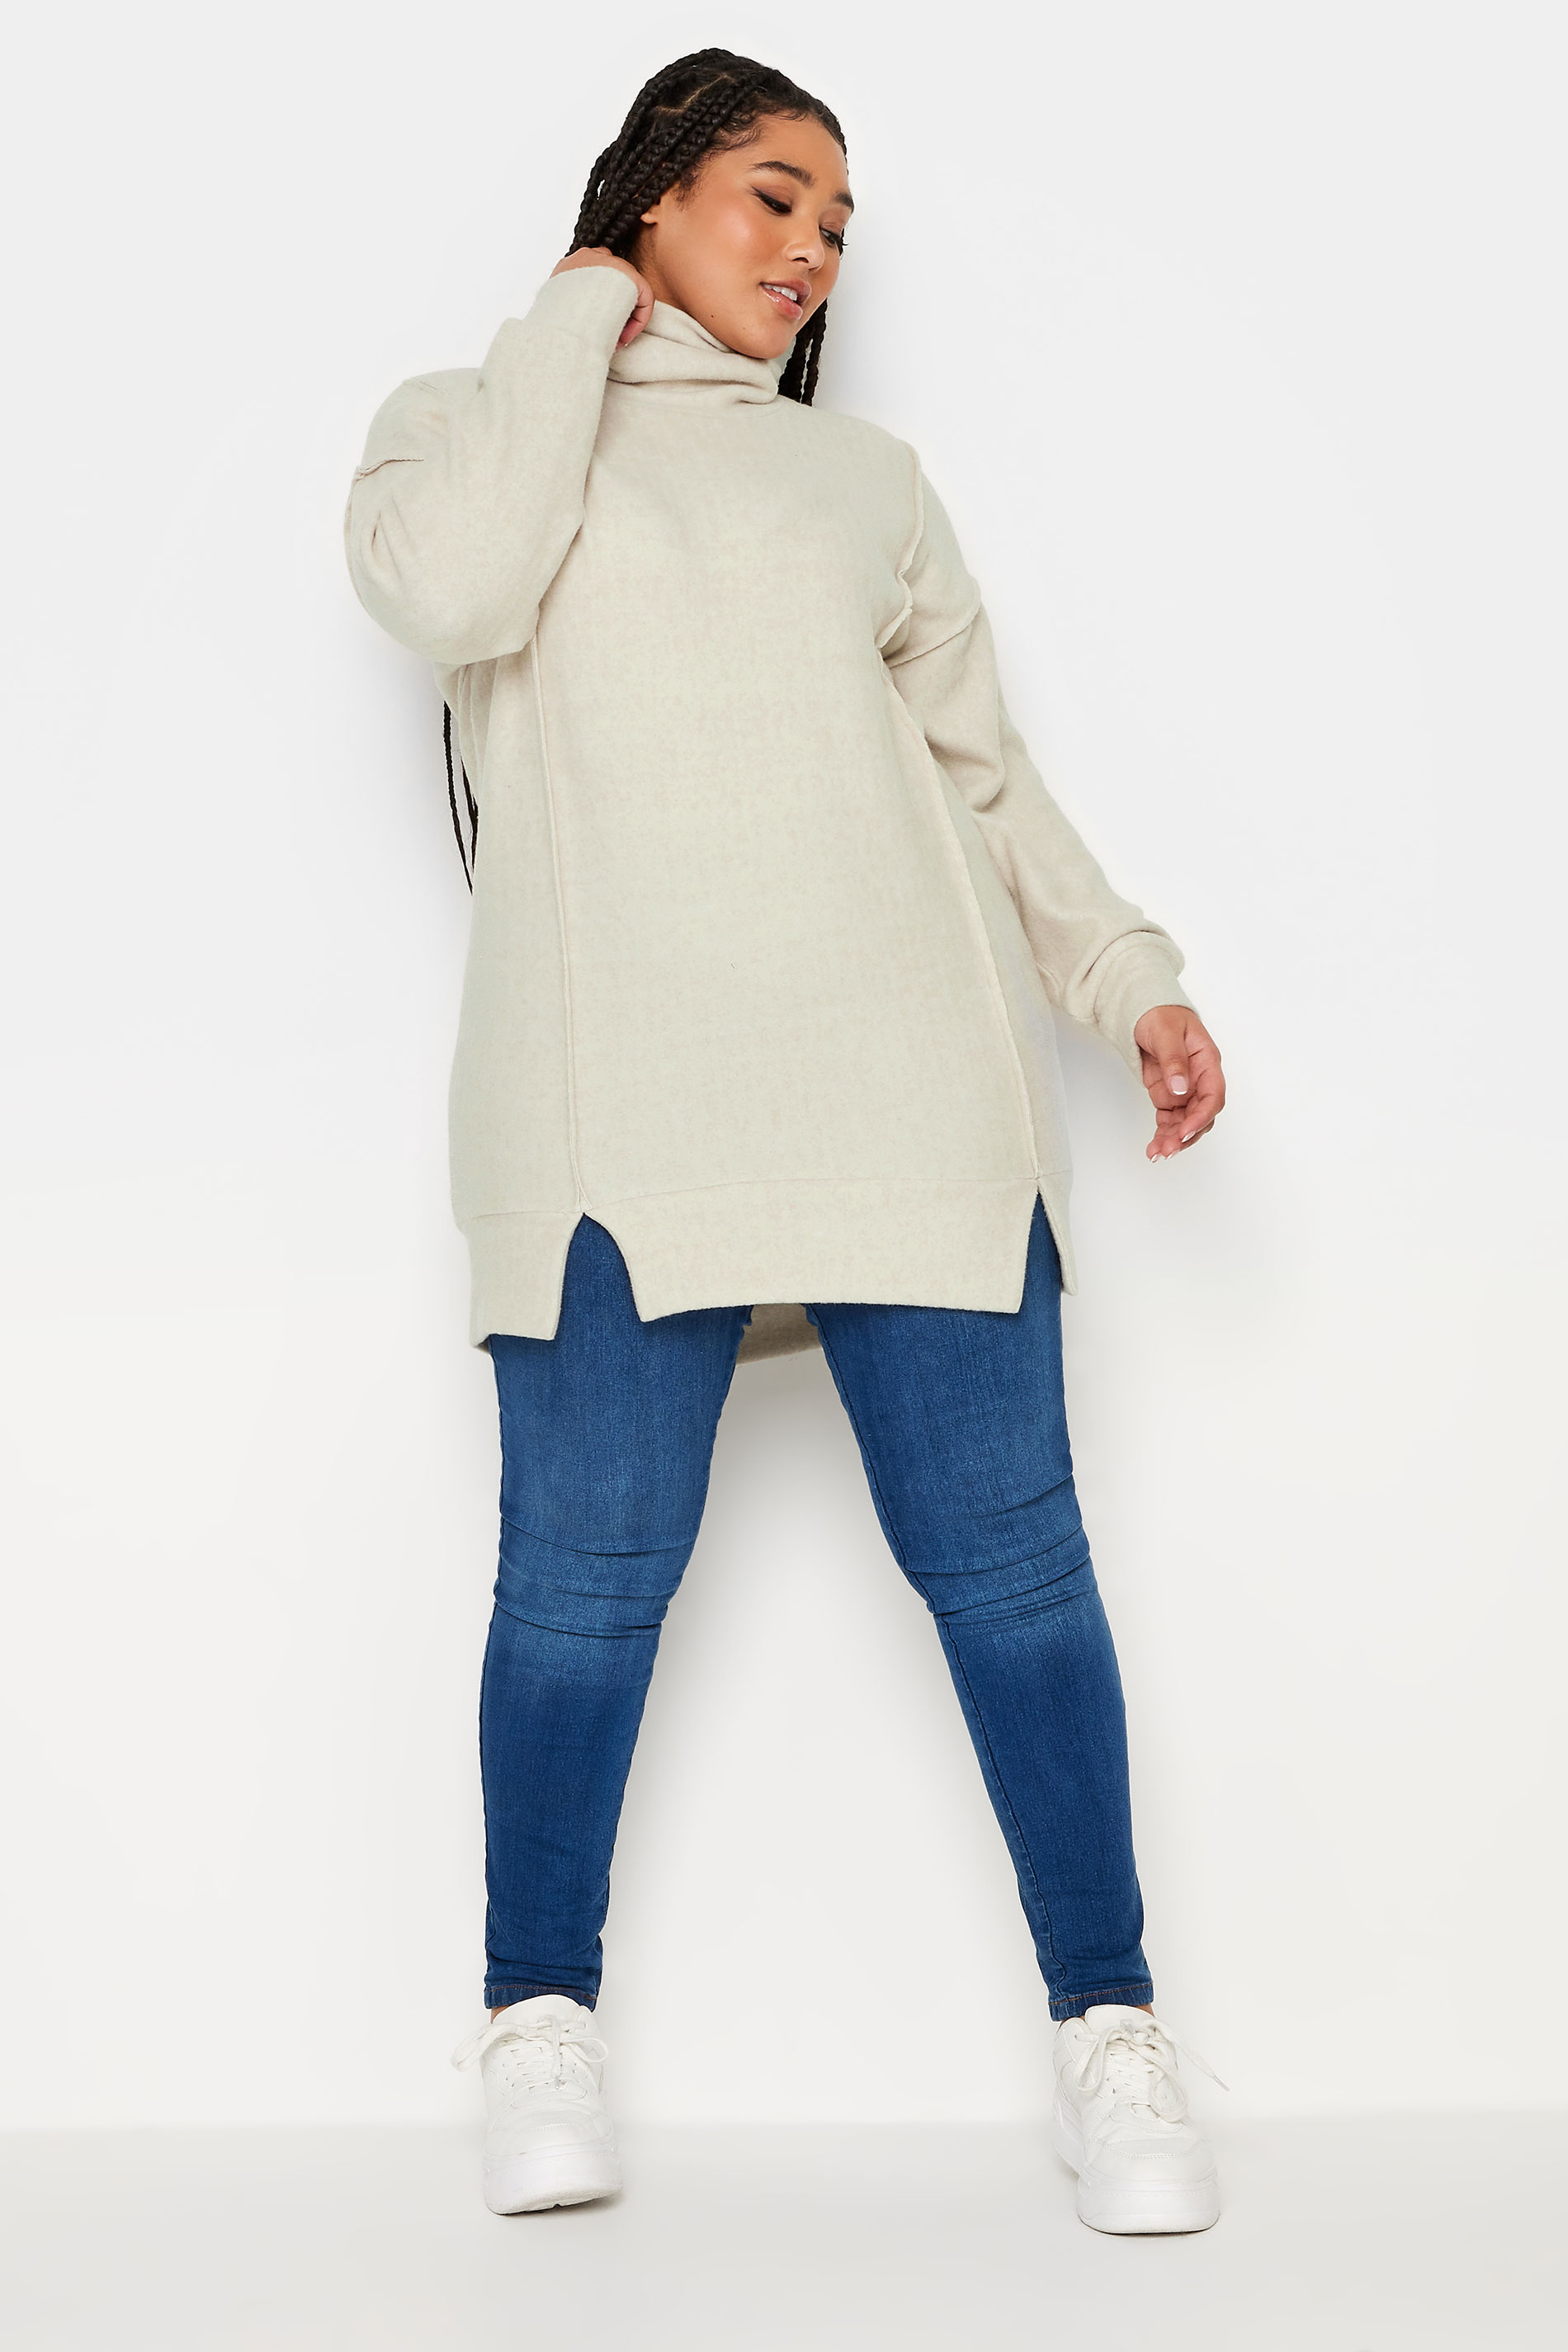 YOURS LUXURY Plus Size Cream Soft Touch Turtle Neck Jumper | Yours Clothing 2